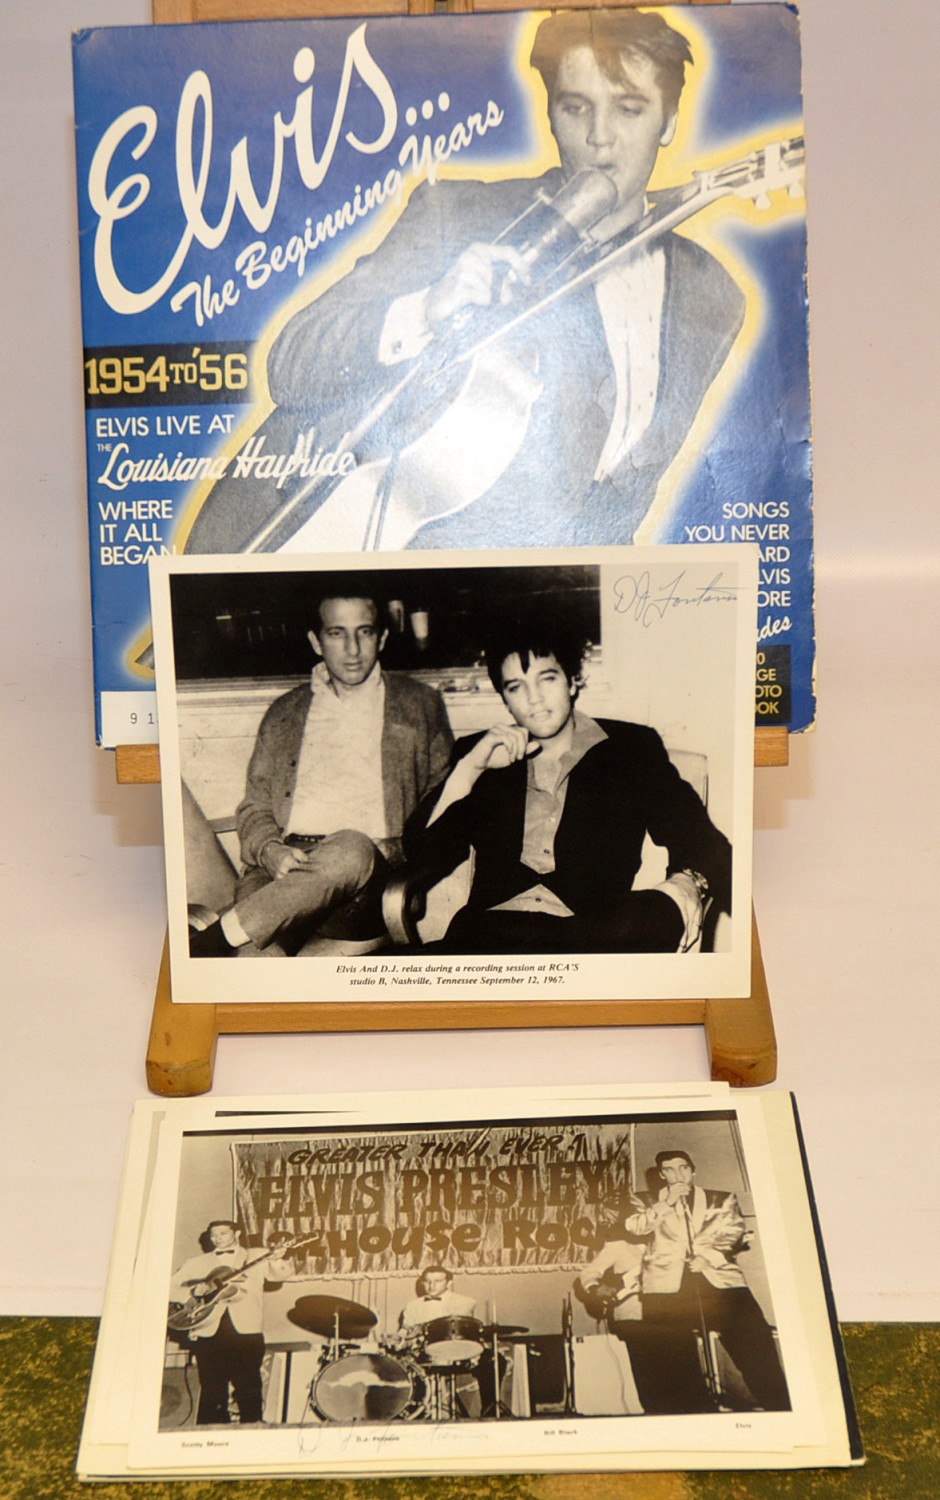 `ELVIS THE BEGINNING YEARS`. LP INCLUDING PHOTOBOOK SIGNED BY D.J. FONTANA PLUS 4 PHOTOS SIGNED BY